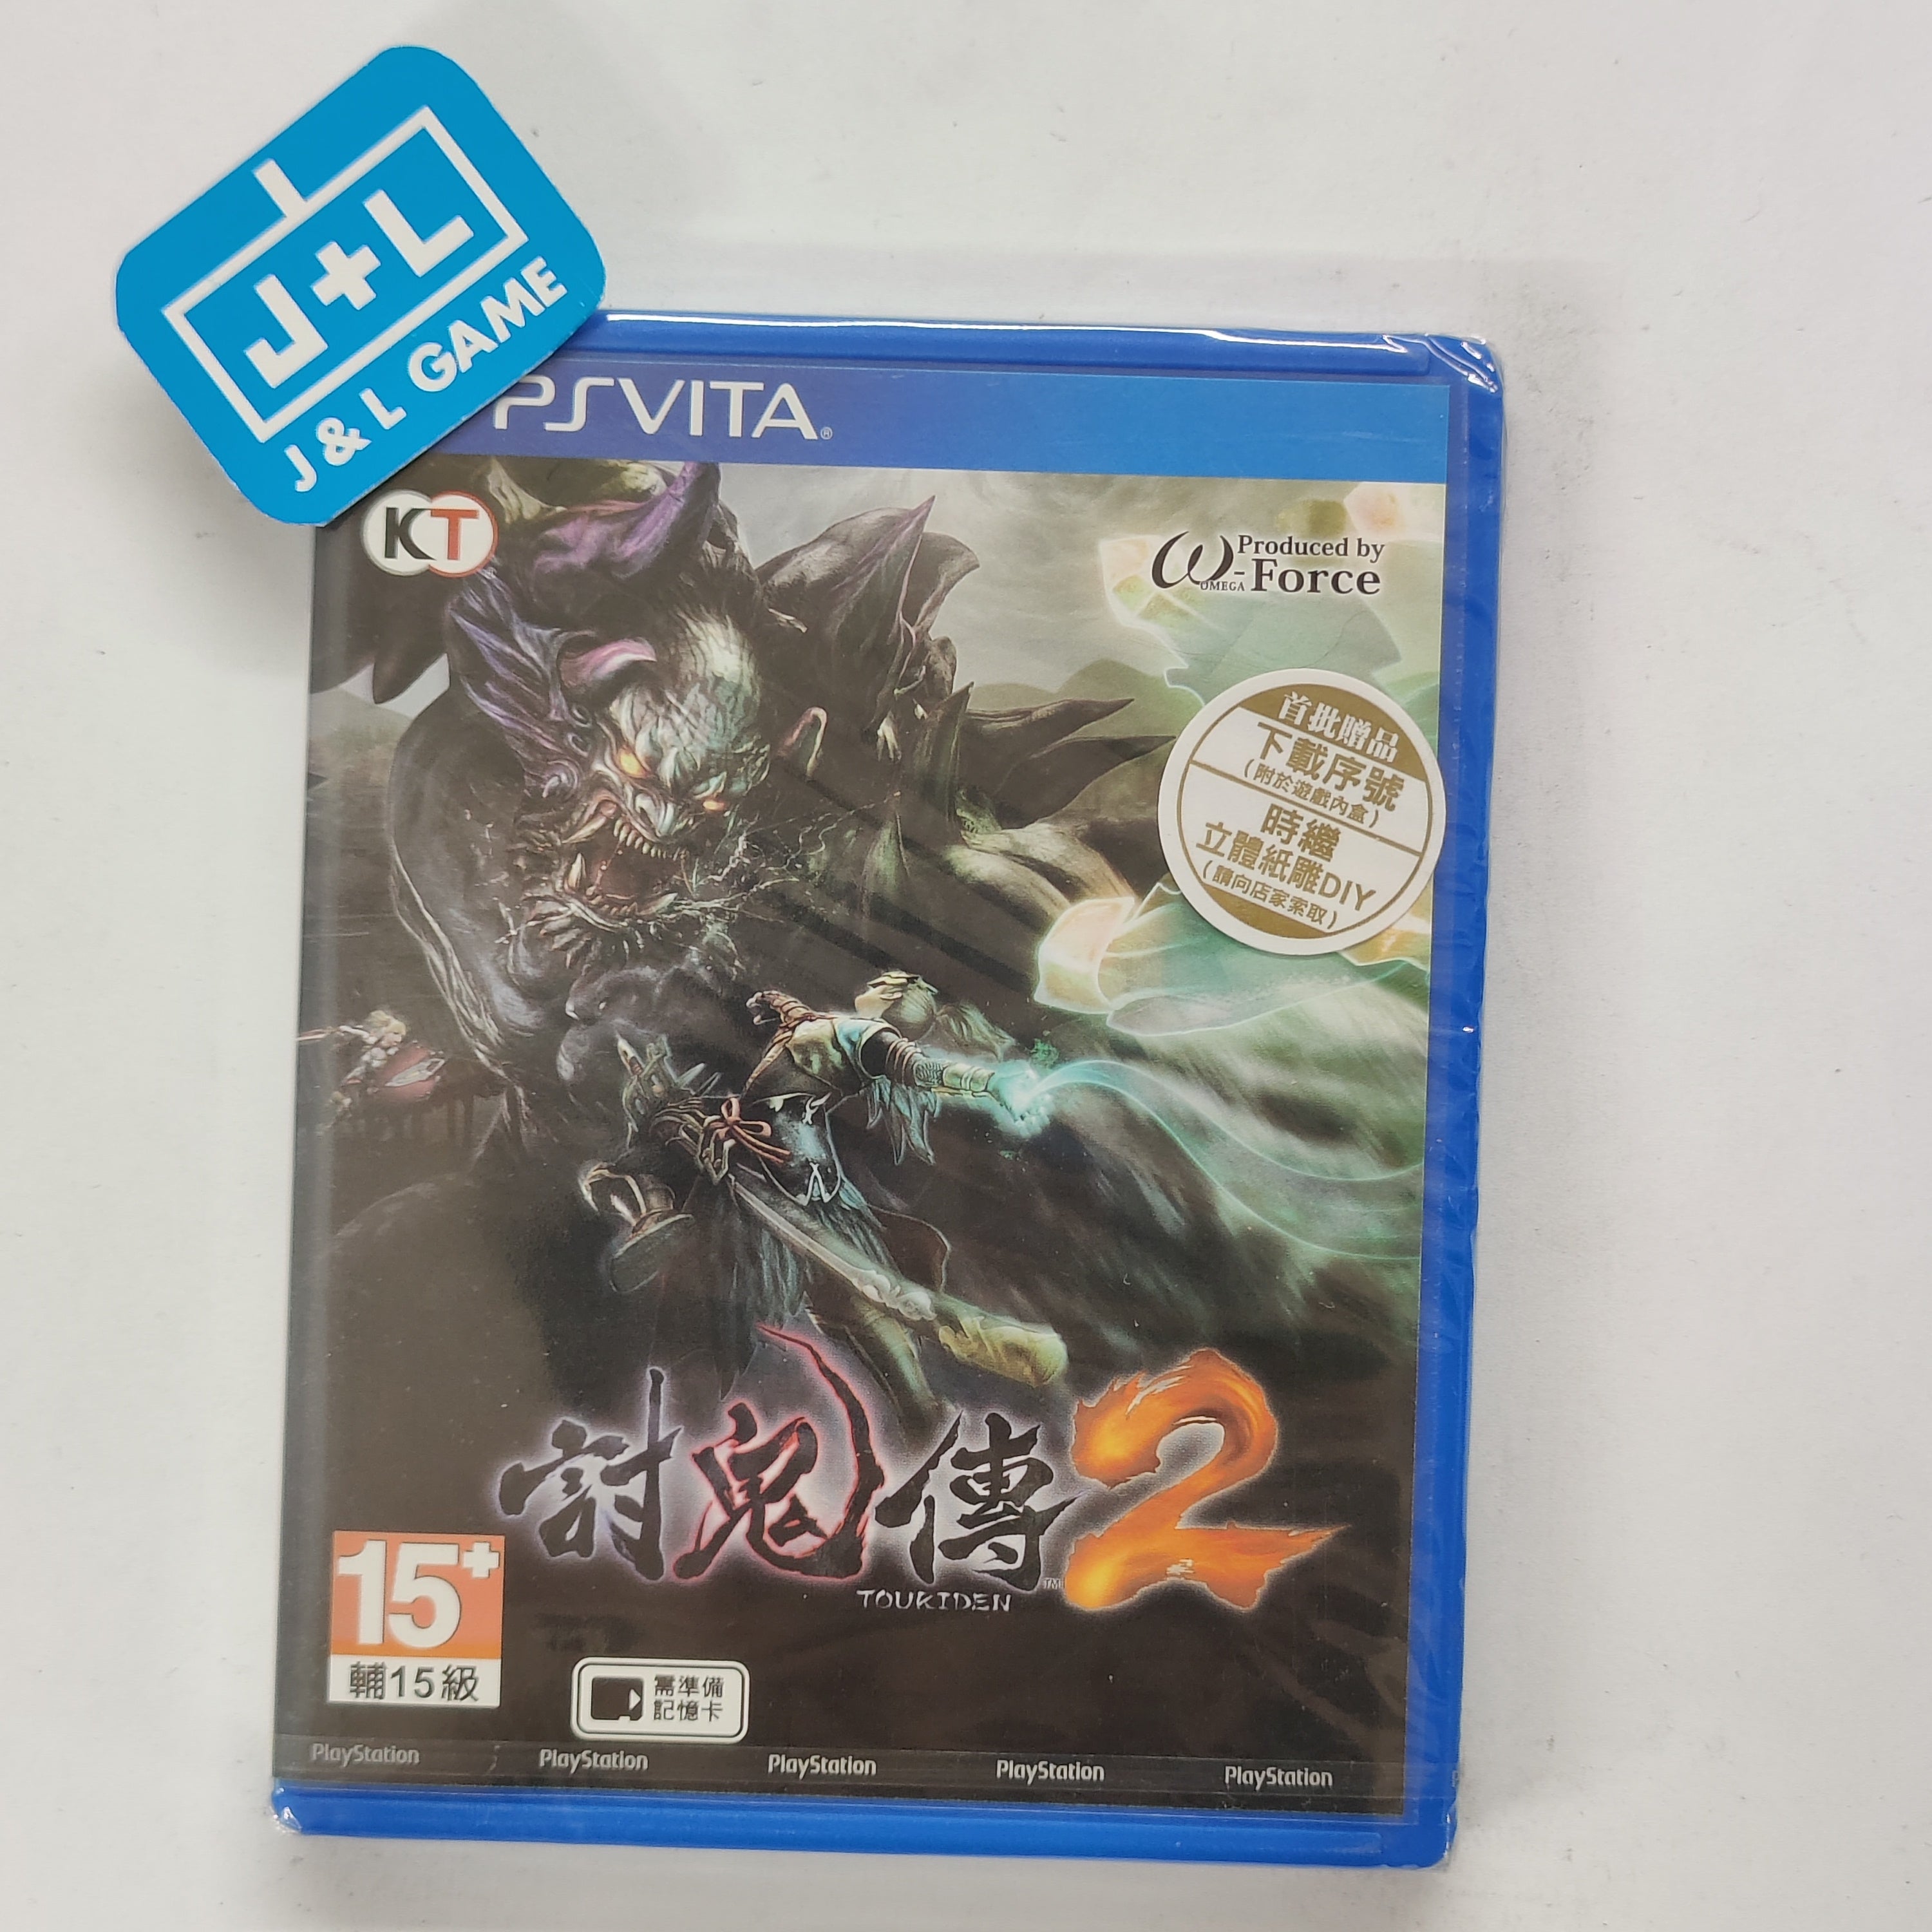 Toukiden 2 (Chinese Sub) - (PSV) PlayStation Vita (Asia Import) Video Games J&L Video Games New York City   